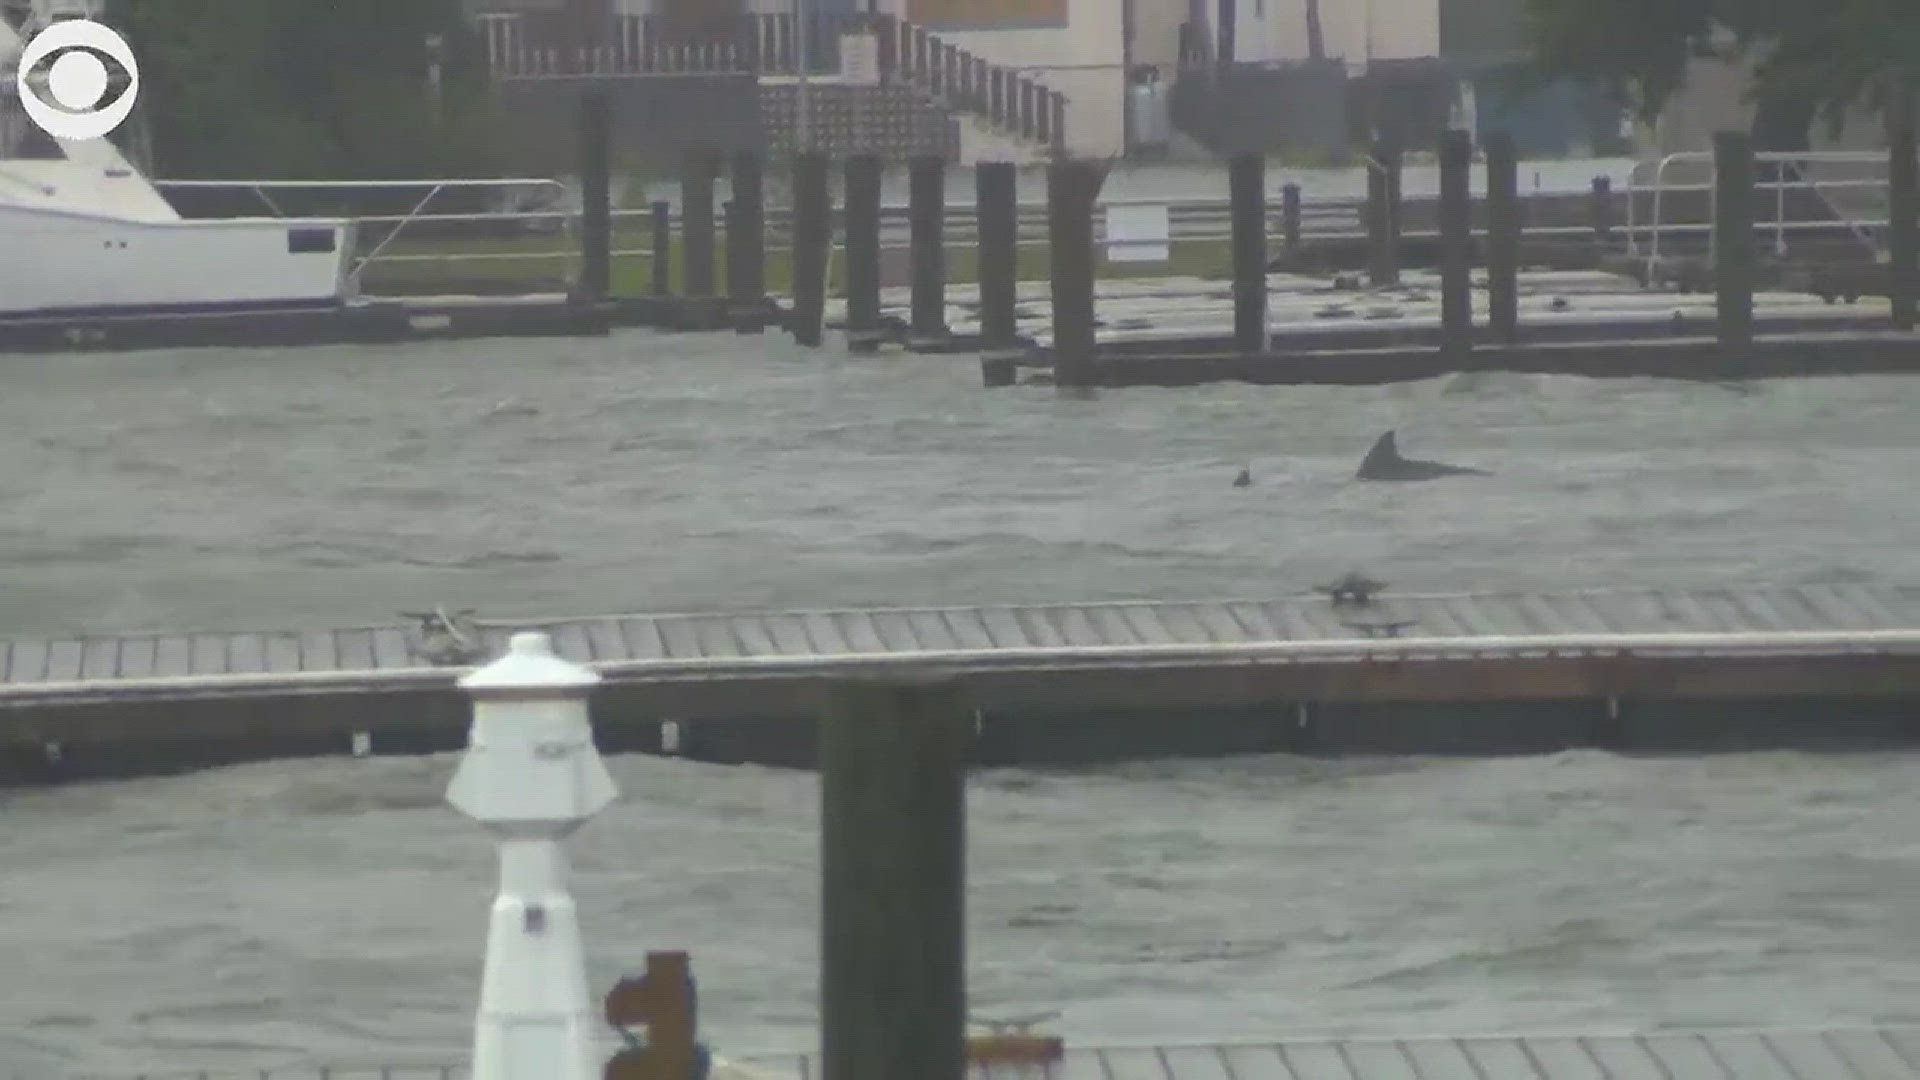 Check out these dolphins swimming in the rising waters near the shore just after Hurricane Florence hit near Wilmington this morning.